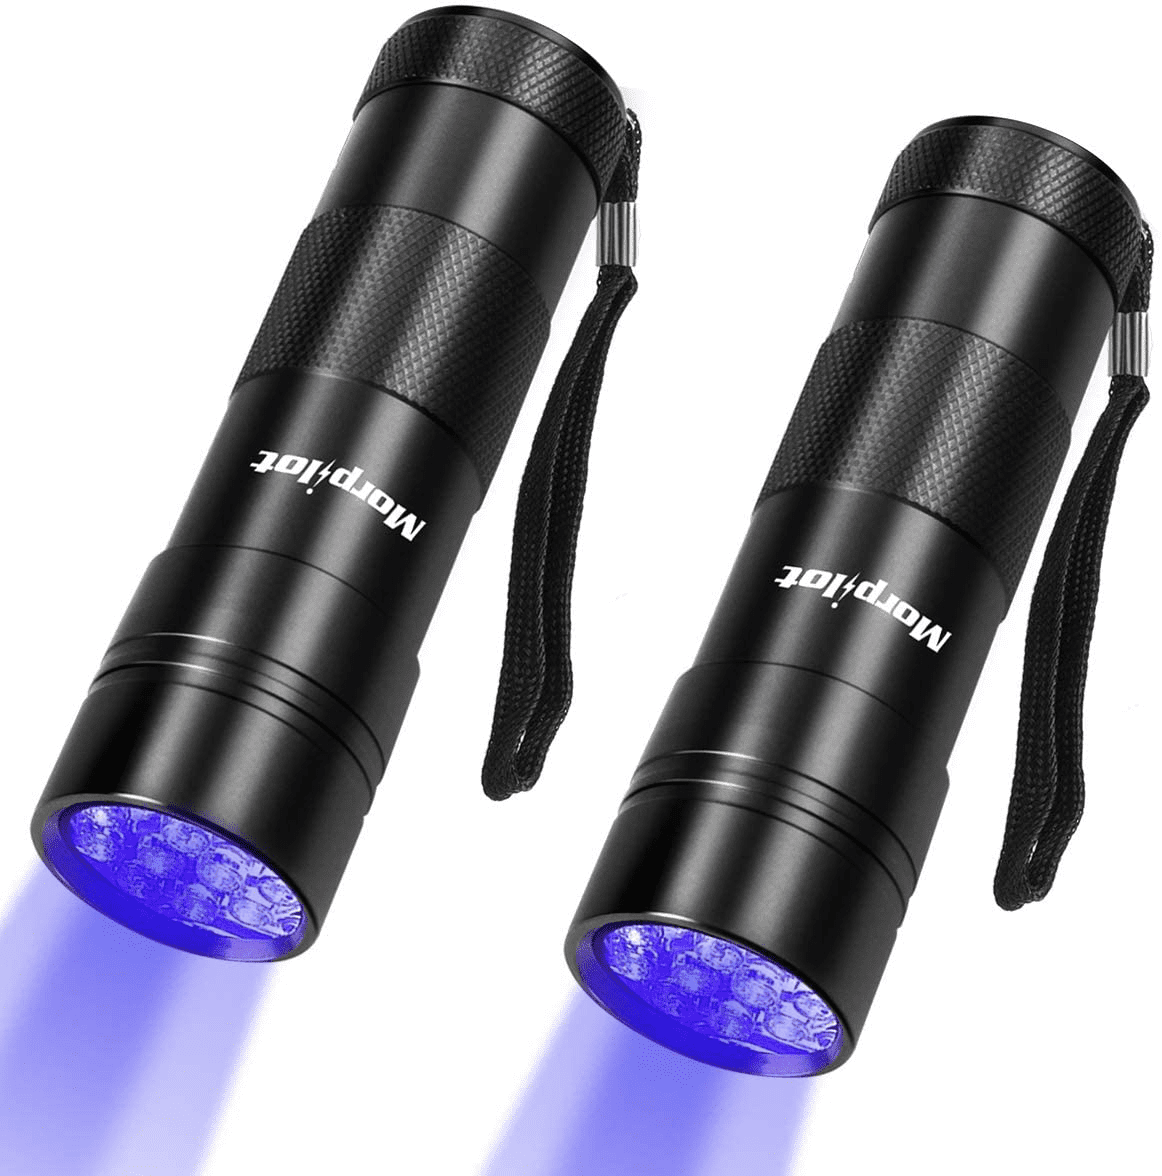 3in1 LED Tactical Flashlight UV Black Light & Redlight Zoomable Waterproof Pocket-size Flashlight for Pet Urine Stains Detection/Camping Black Light Flashlight Rechargeable 1200Lumen 7 Light Modes 